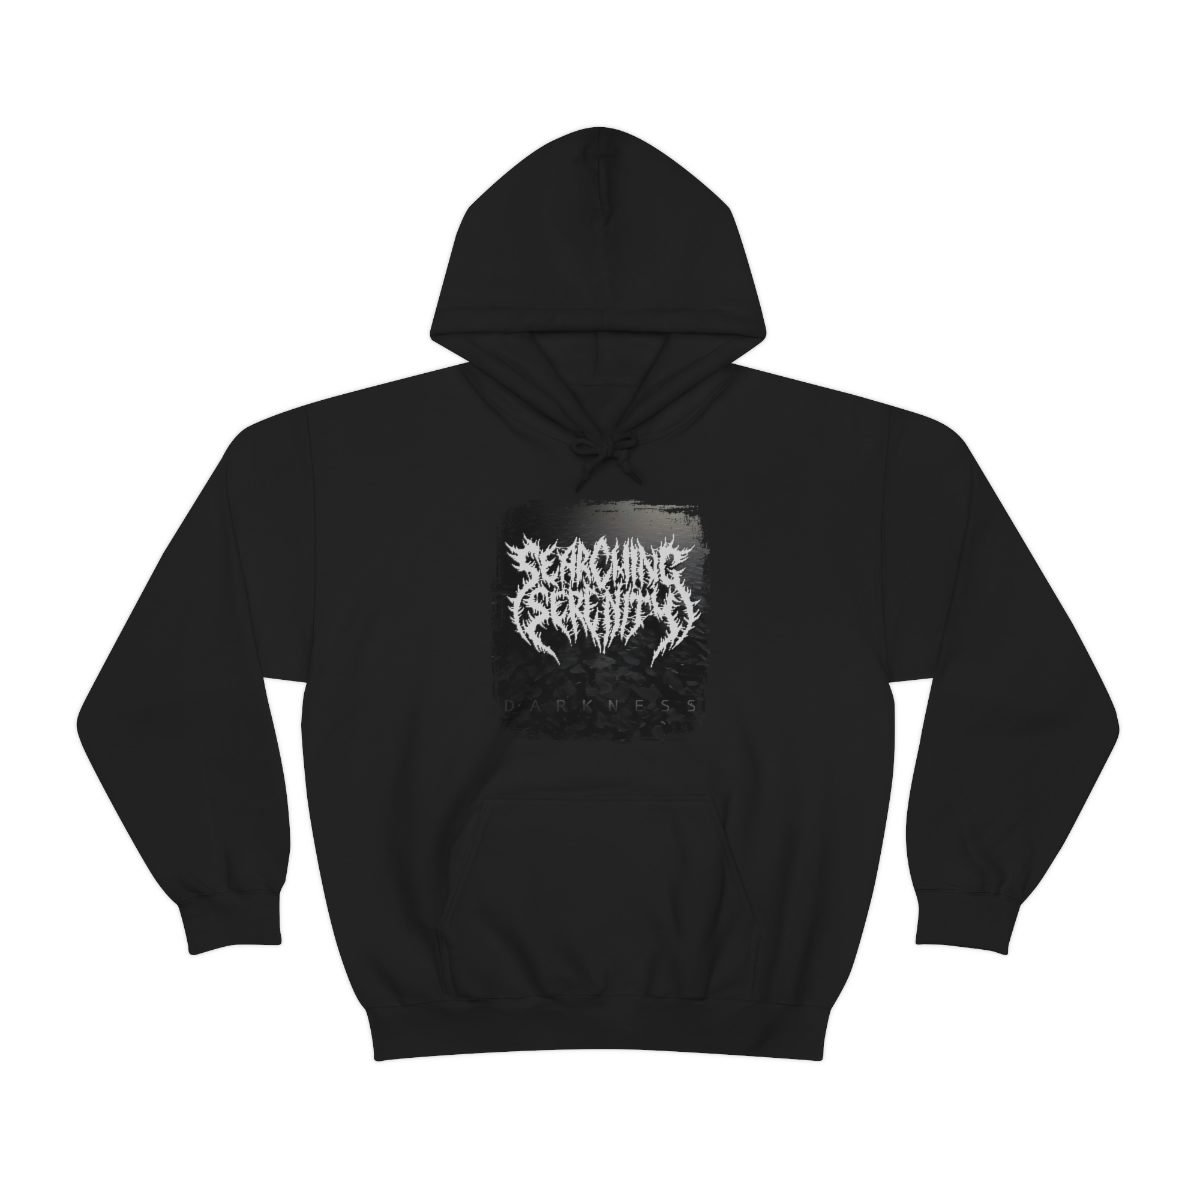 Searching Serenity – Darkness Pullover Hooded Sweatshirt